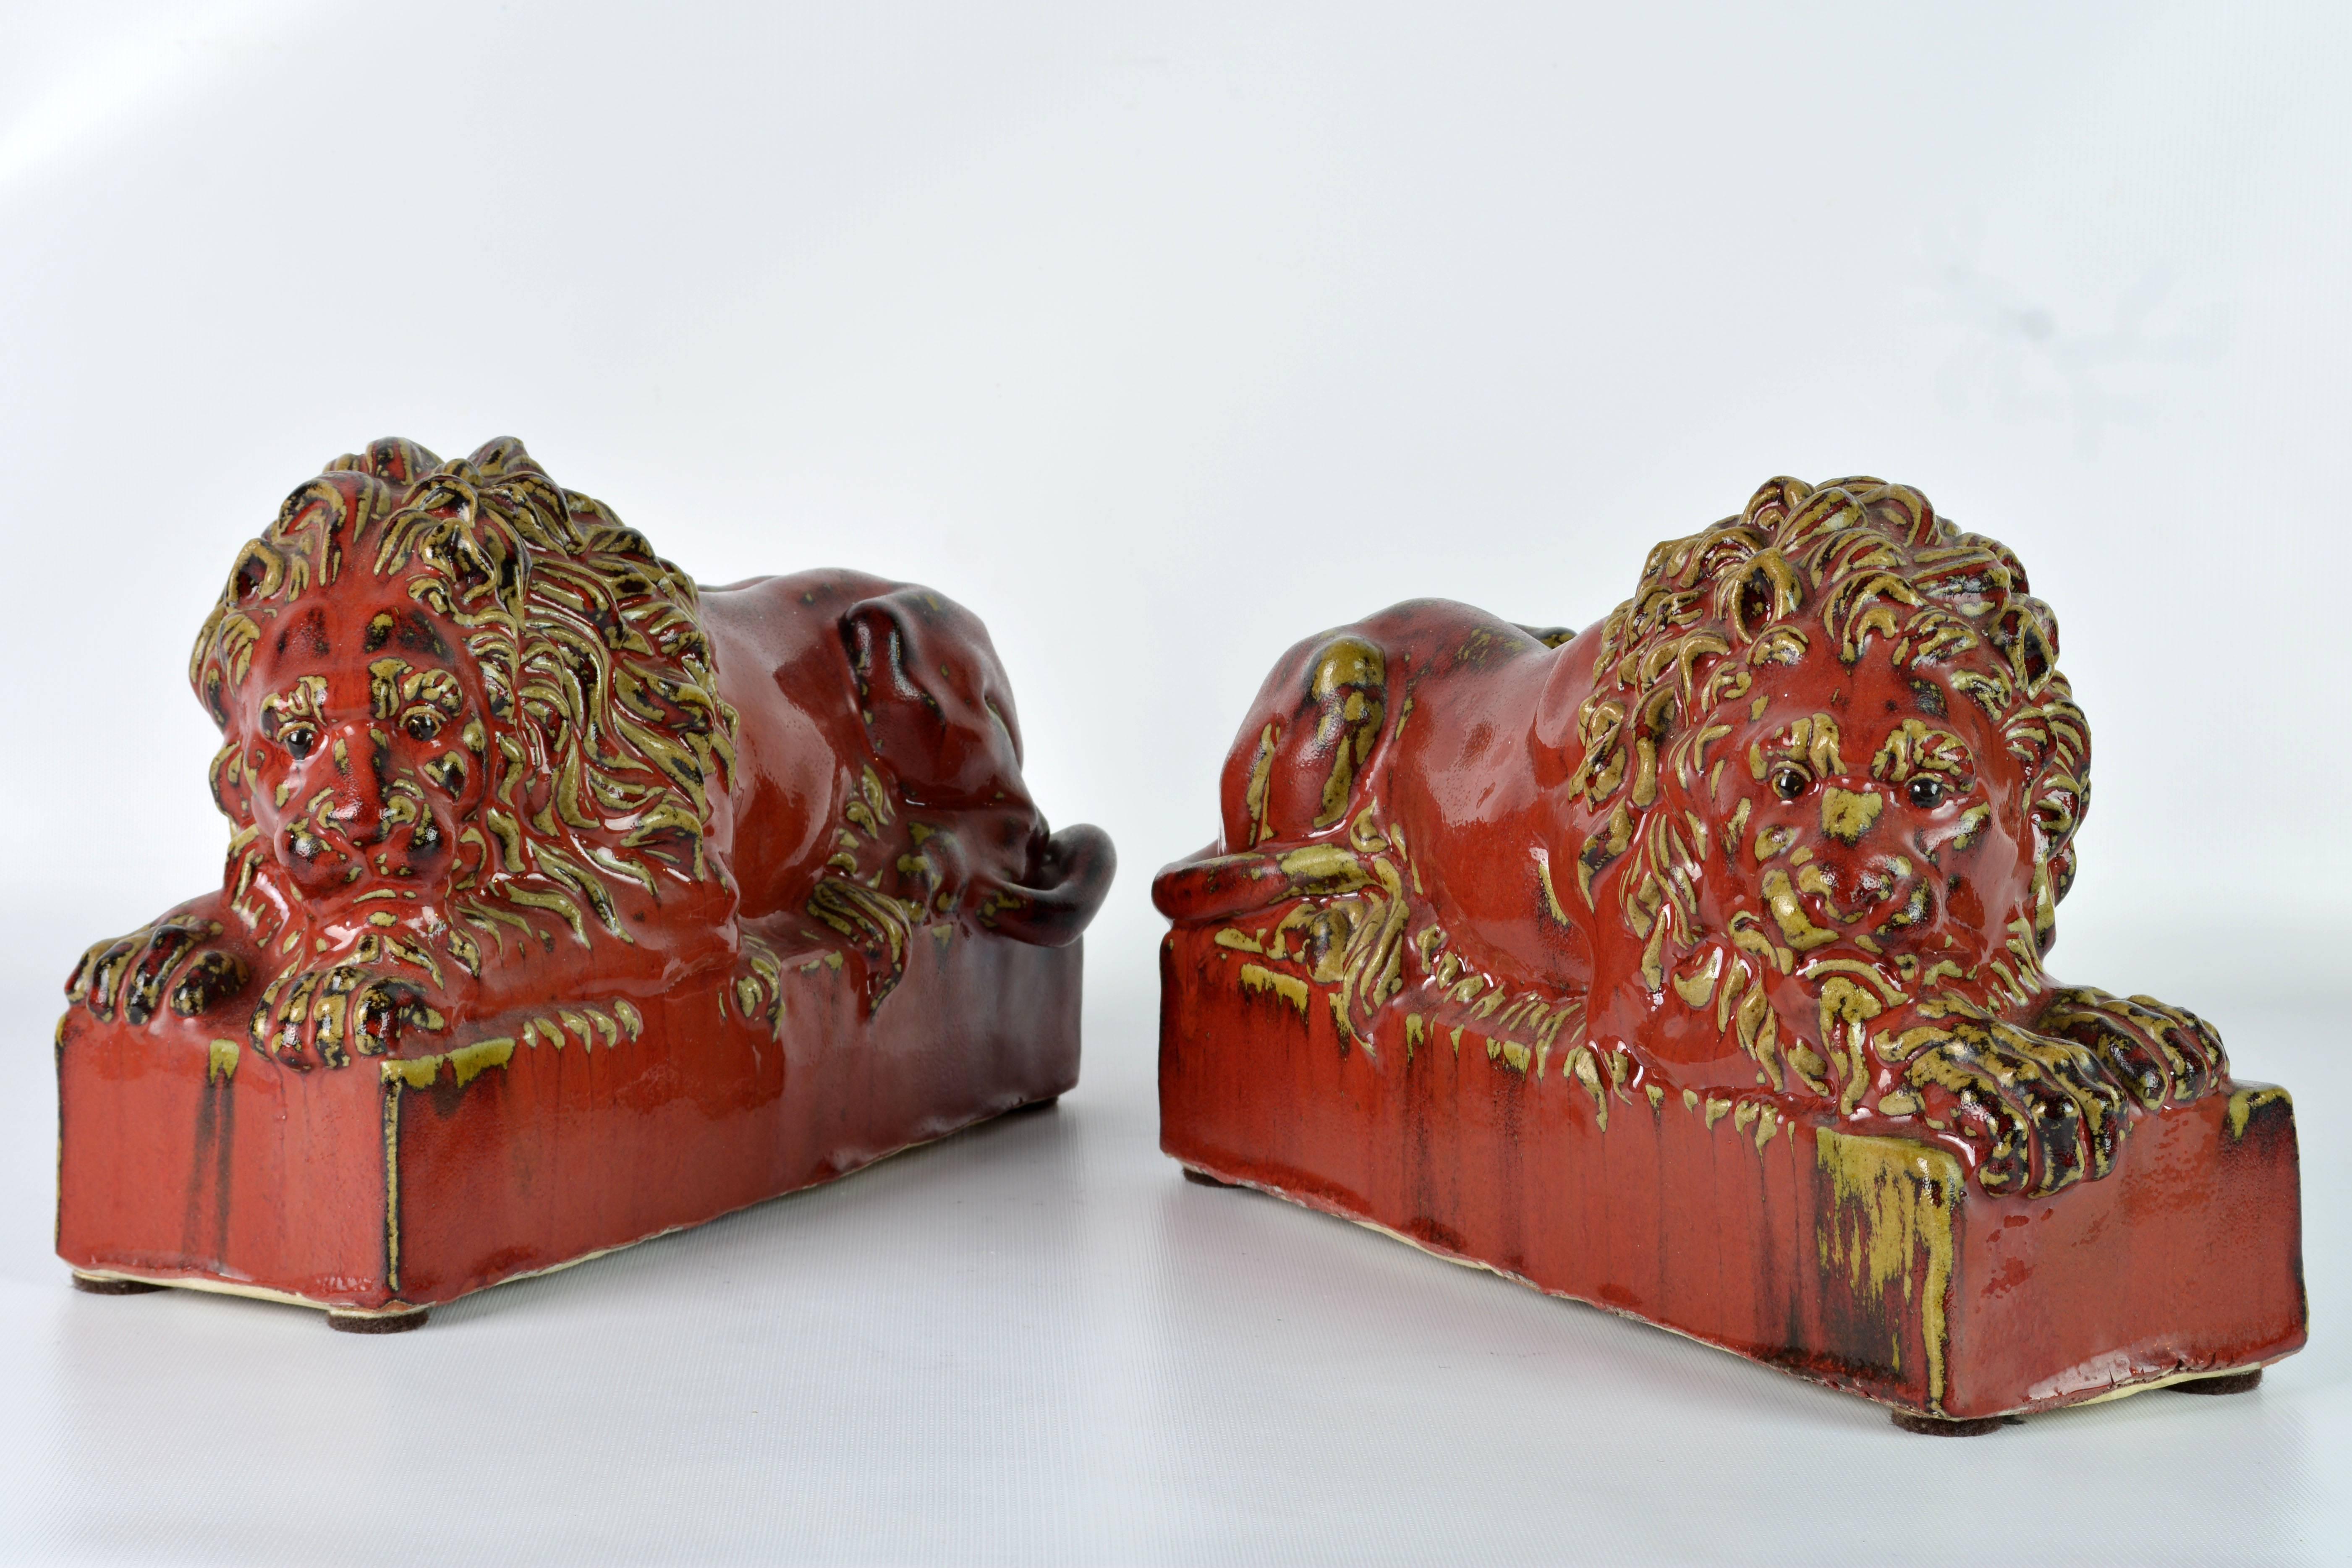 Modern Opposing Pair of 20th Century Oxblood and Celadon Glazed Ceramic Resting Lions